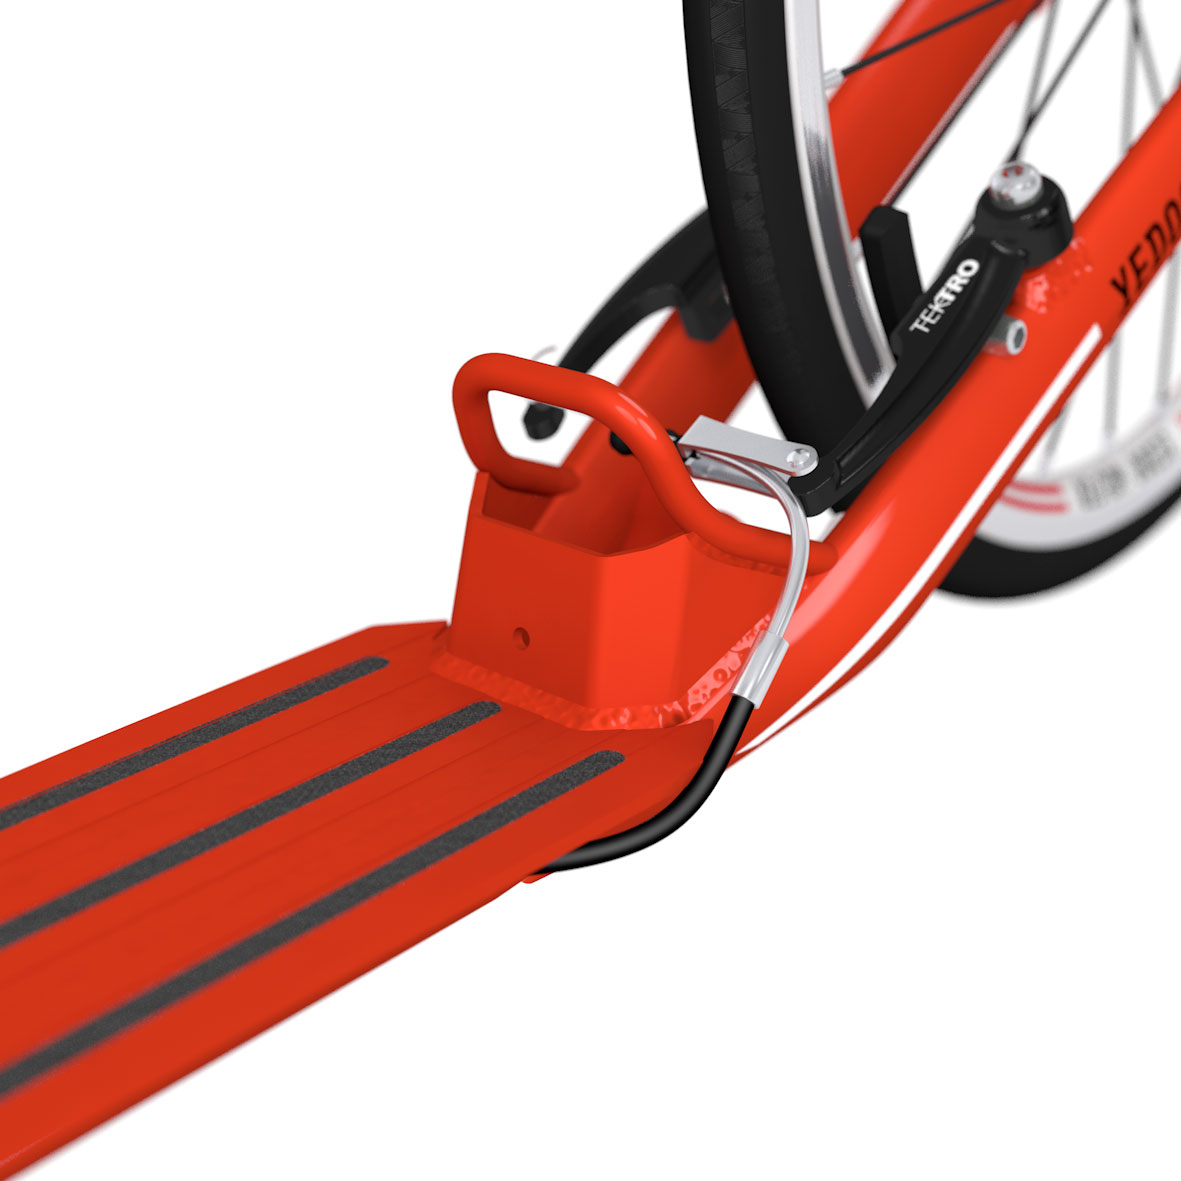 Adhesive anti-slip tapes, practical dropout, narrowed rear fork and bowden cable guided inside the frame.